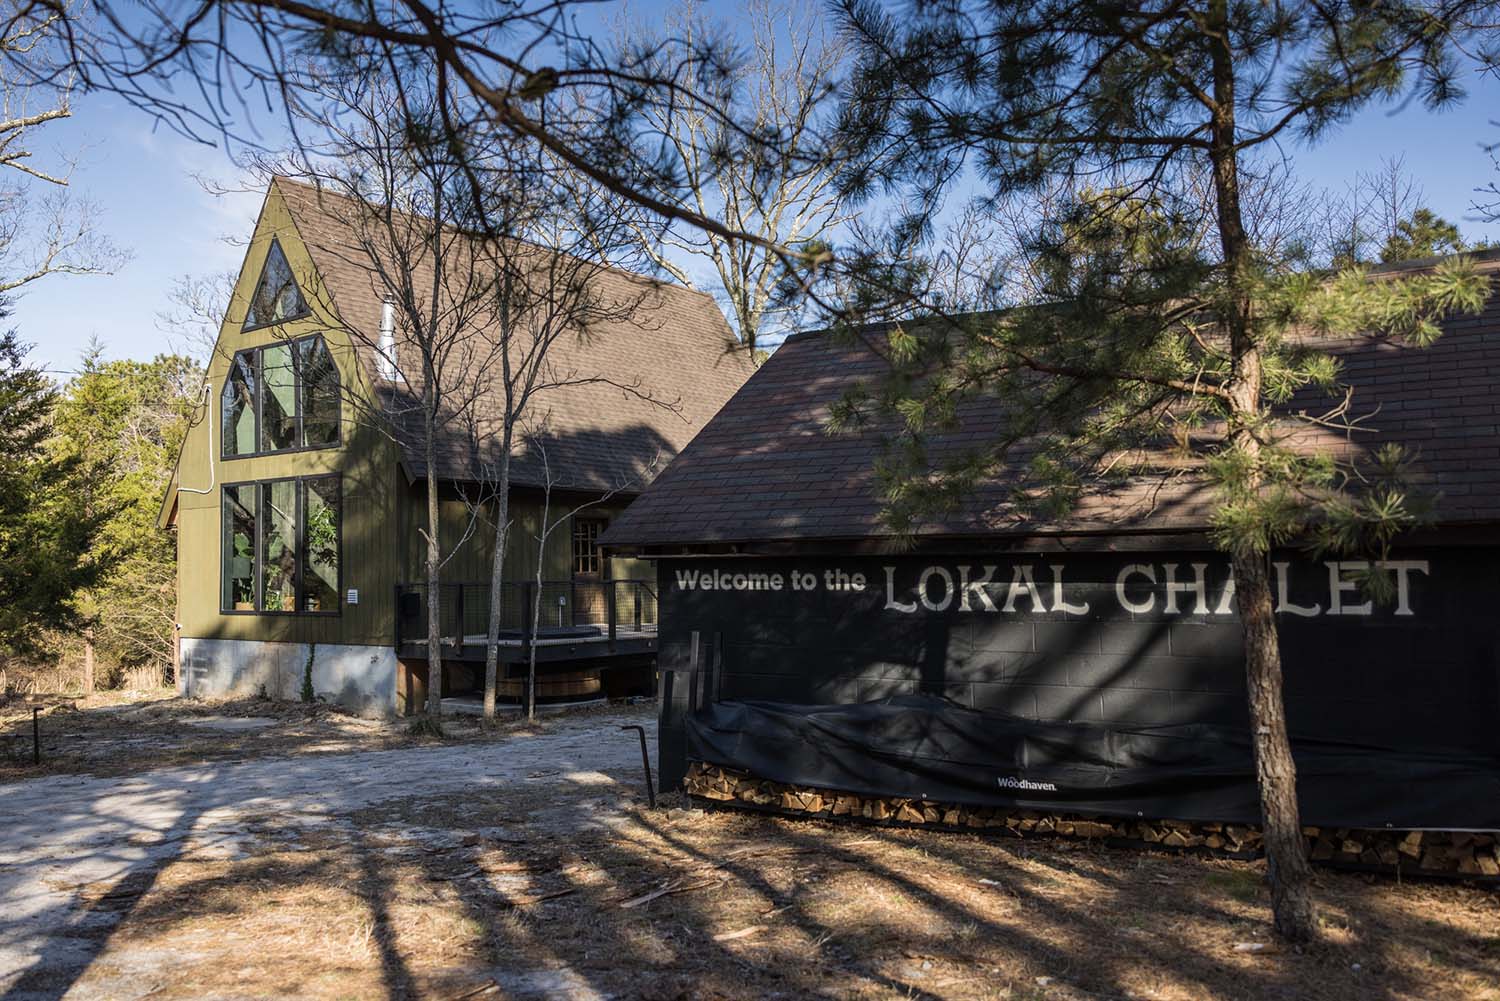 Lokal Chalet South Jersey, Egg Harbor City New Jersey Boutique Cabin